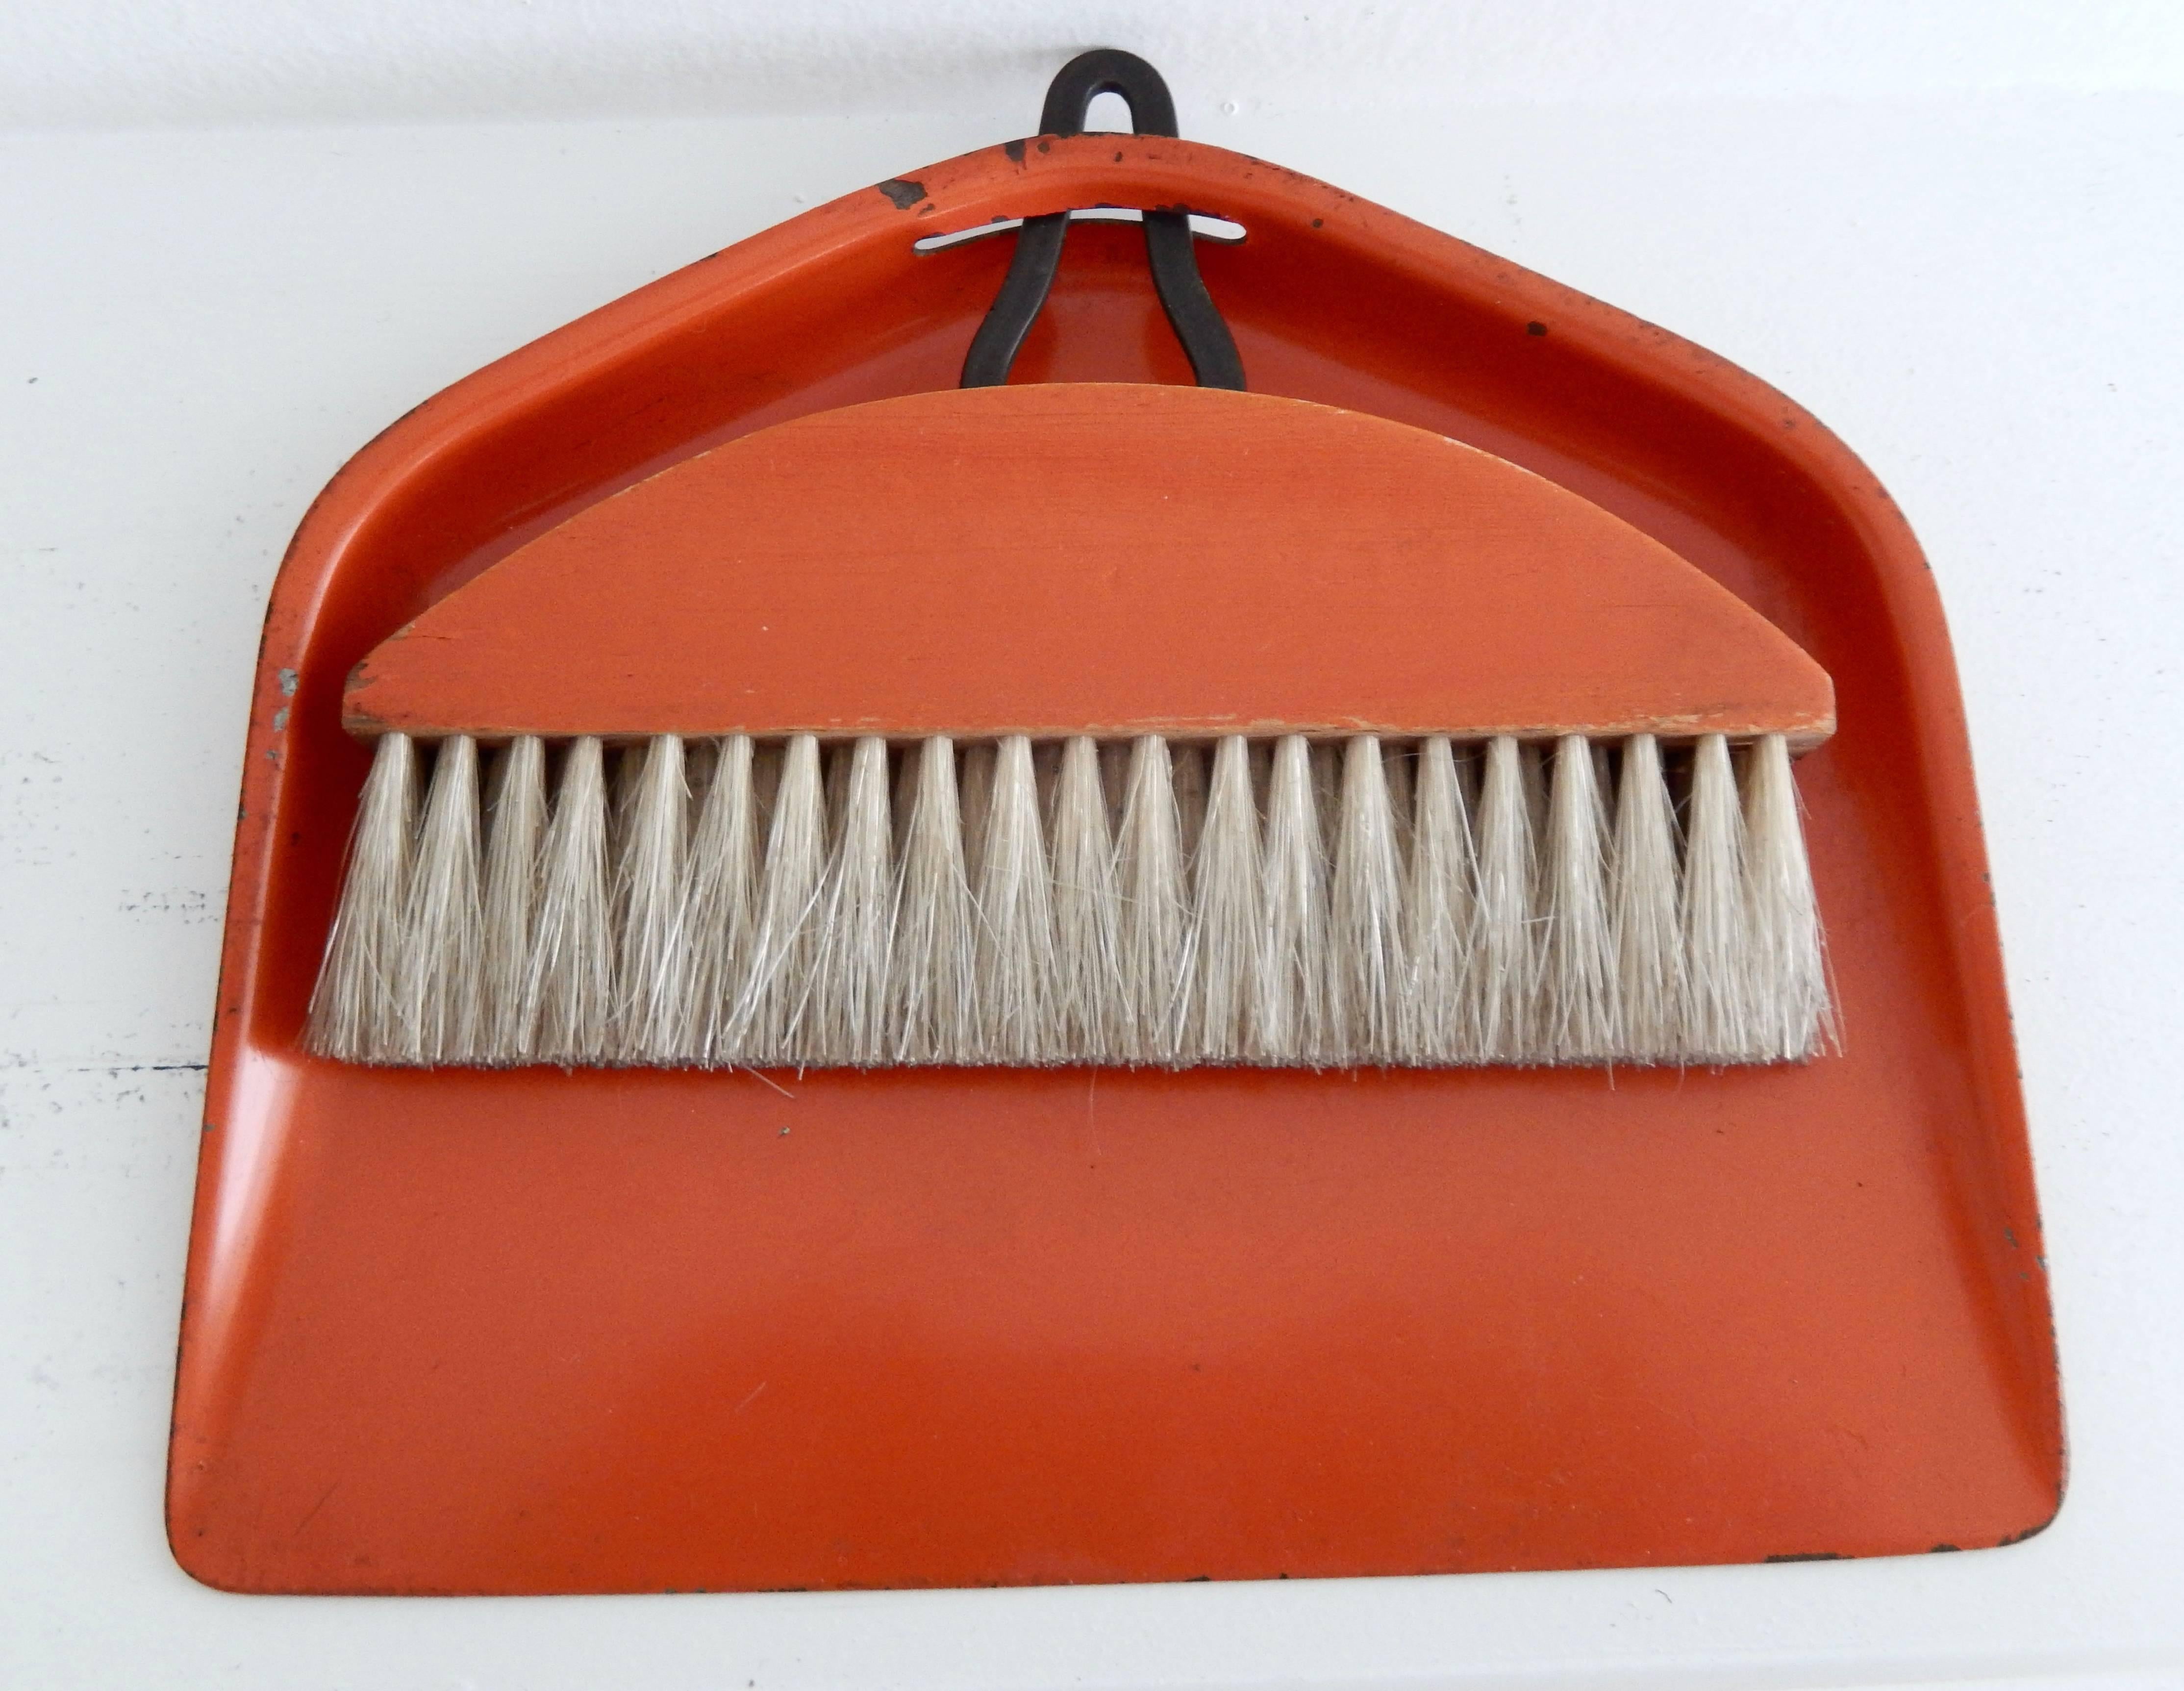 A burnt orange enameled sheet metal and horsehair brush and tray by the Bauhaus artist and Industrial designer Marianne Brandt (1893-1983). A functional, simple design exemplifying the best of Bauhaus metalwork. A fine example of pre-war modern